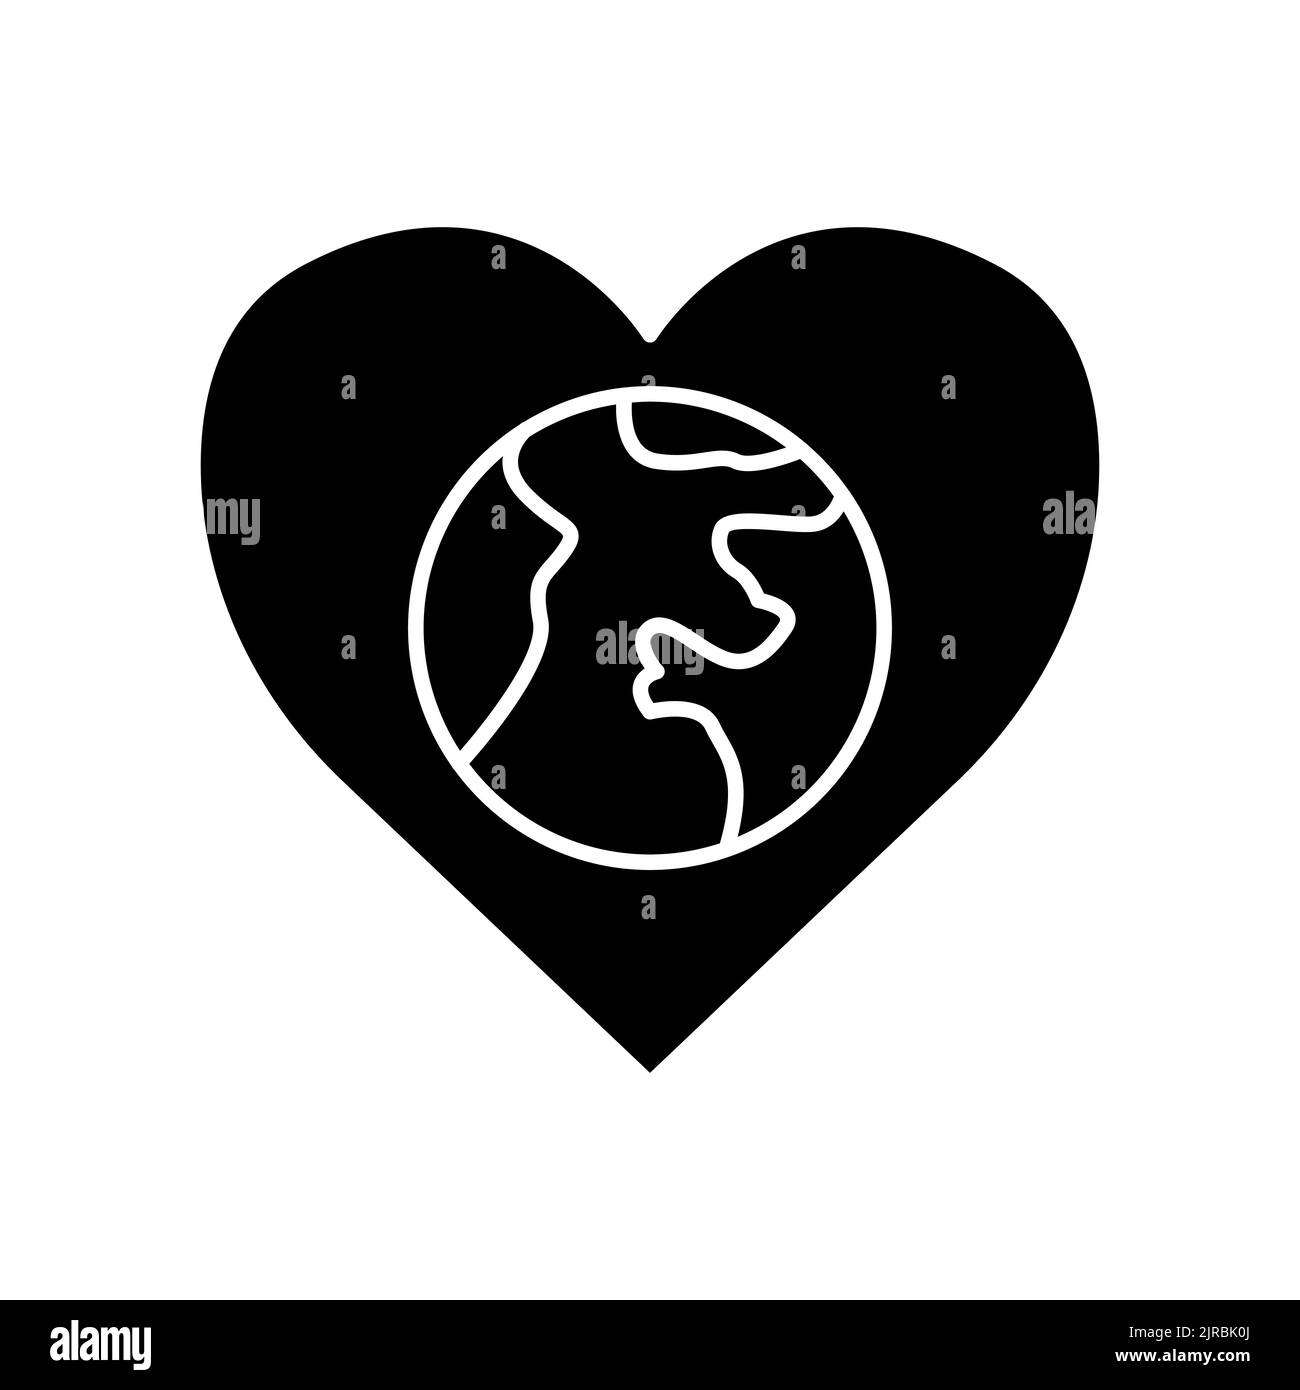 Earth icon in heart. icon related to charity, International day of charity. Glyph icon style, solid. Simple design editable Stock Vector